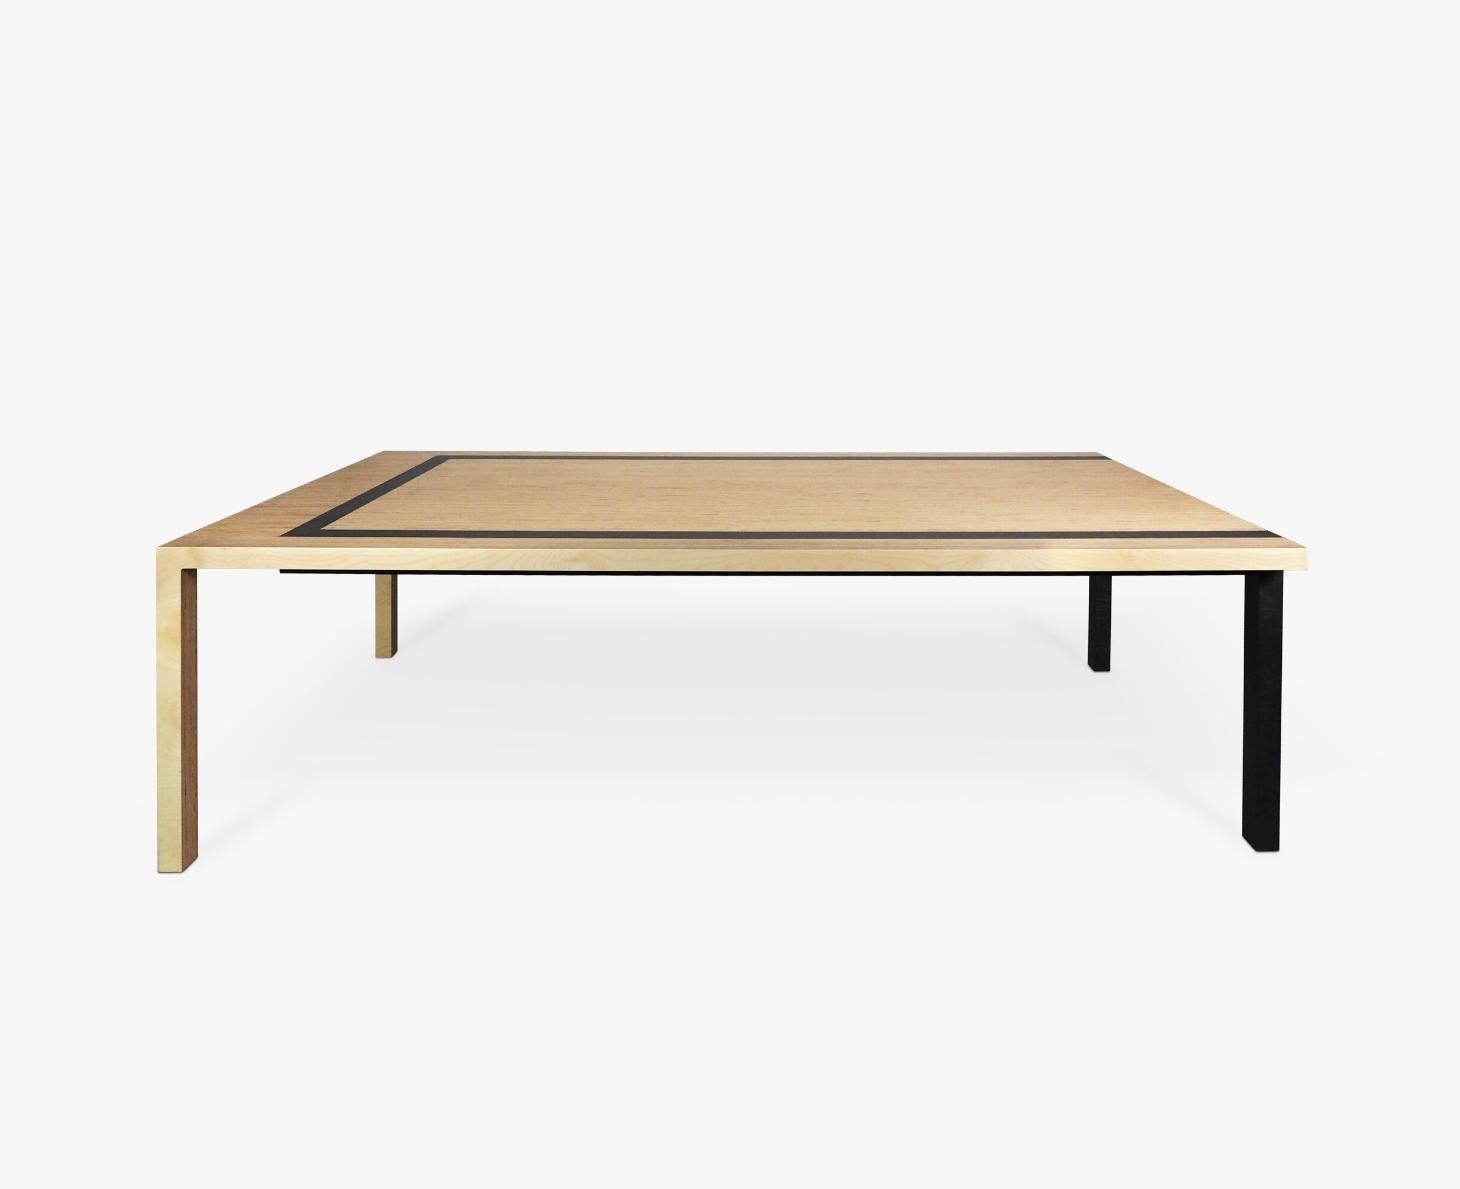 Danish Scandinavian Designer Natural Wood Small Size Dining Table For Sale